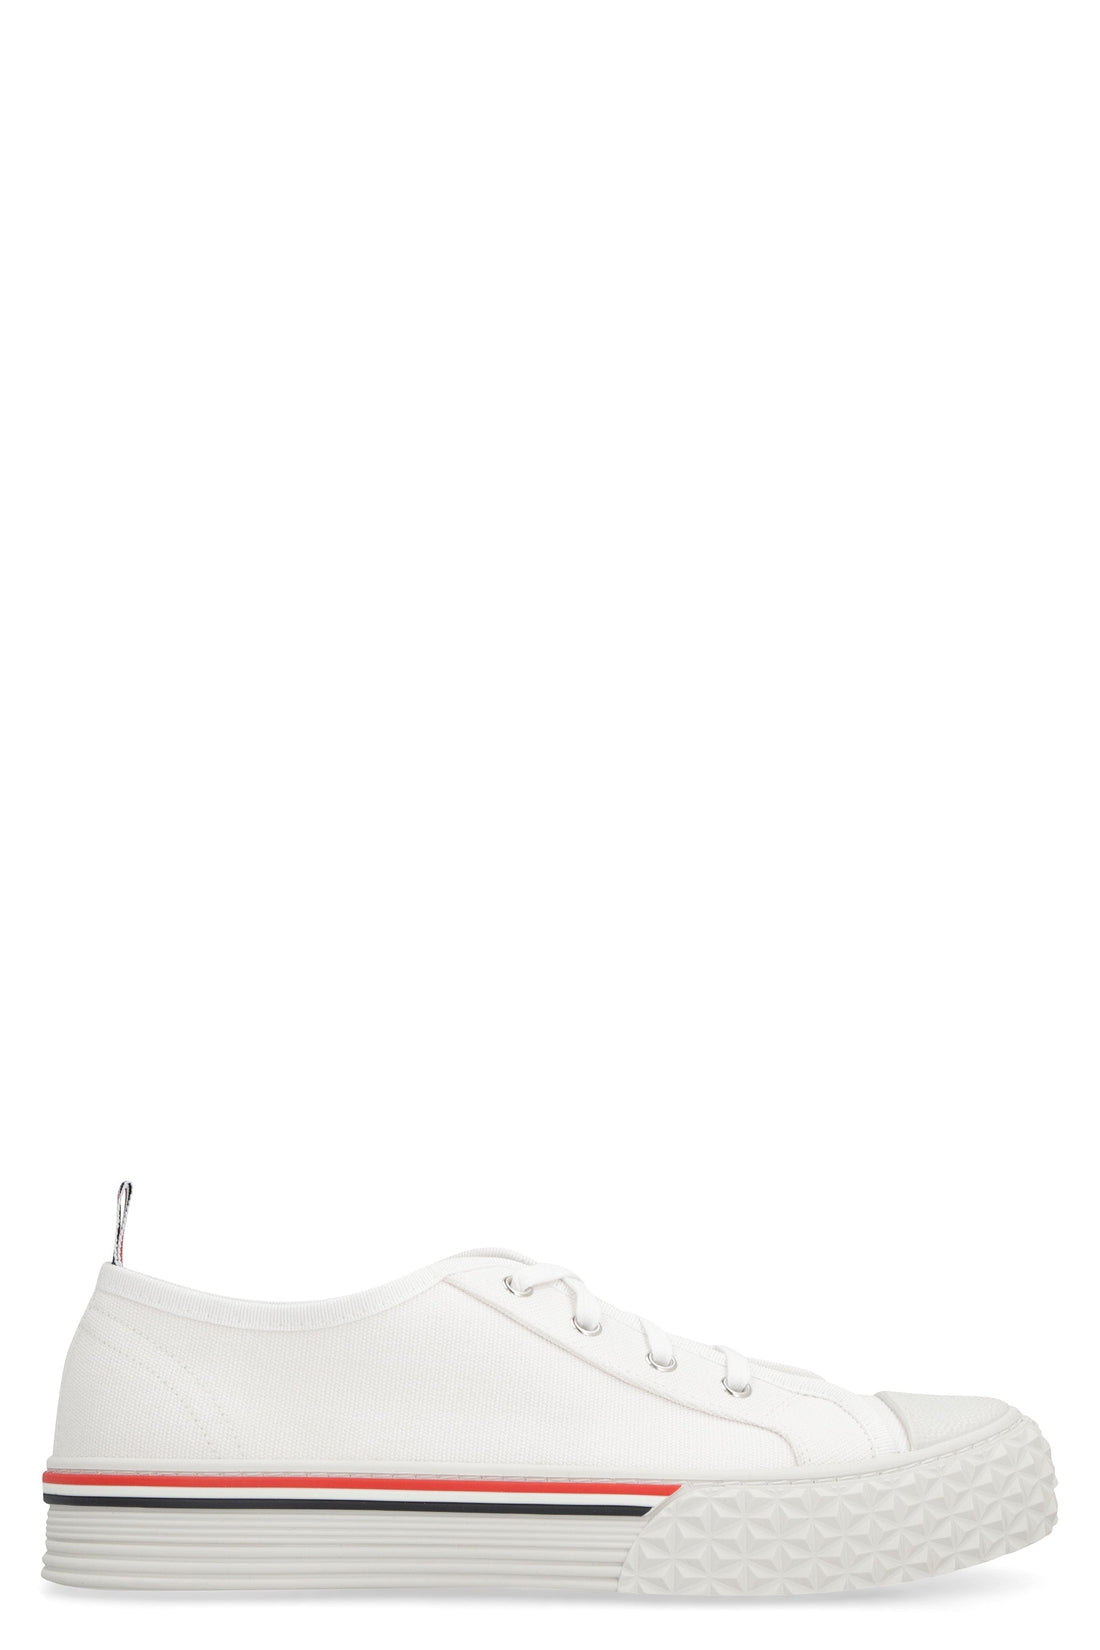 Thom Browne-OUTLET-SALE-Collegiate canvas low-top sneakers-ARCHIVIST